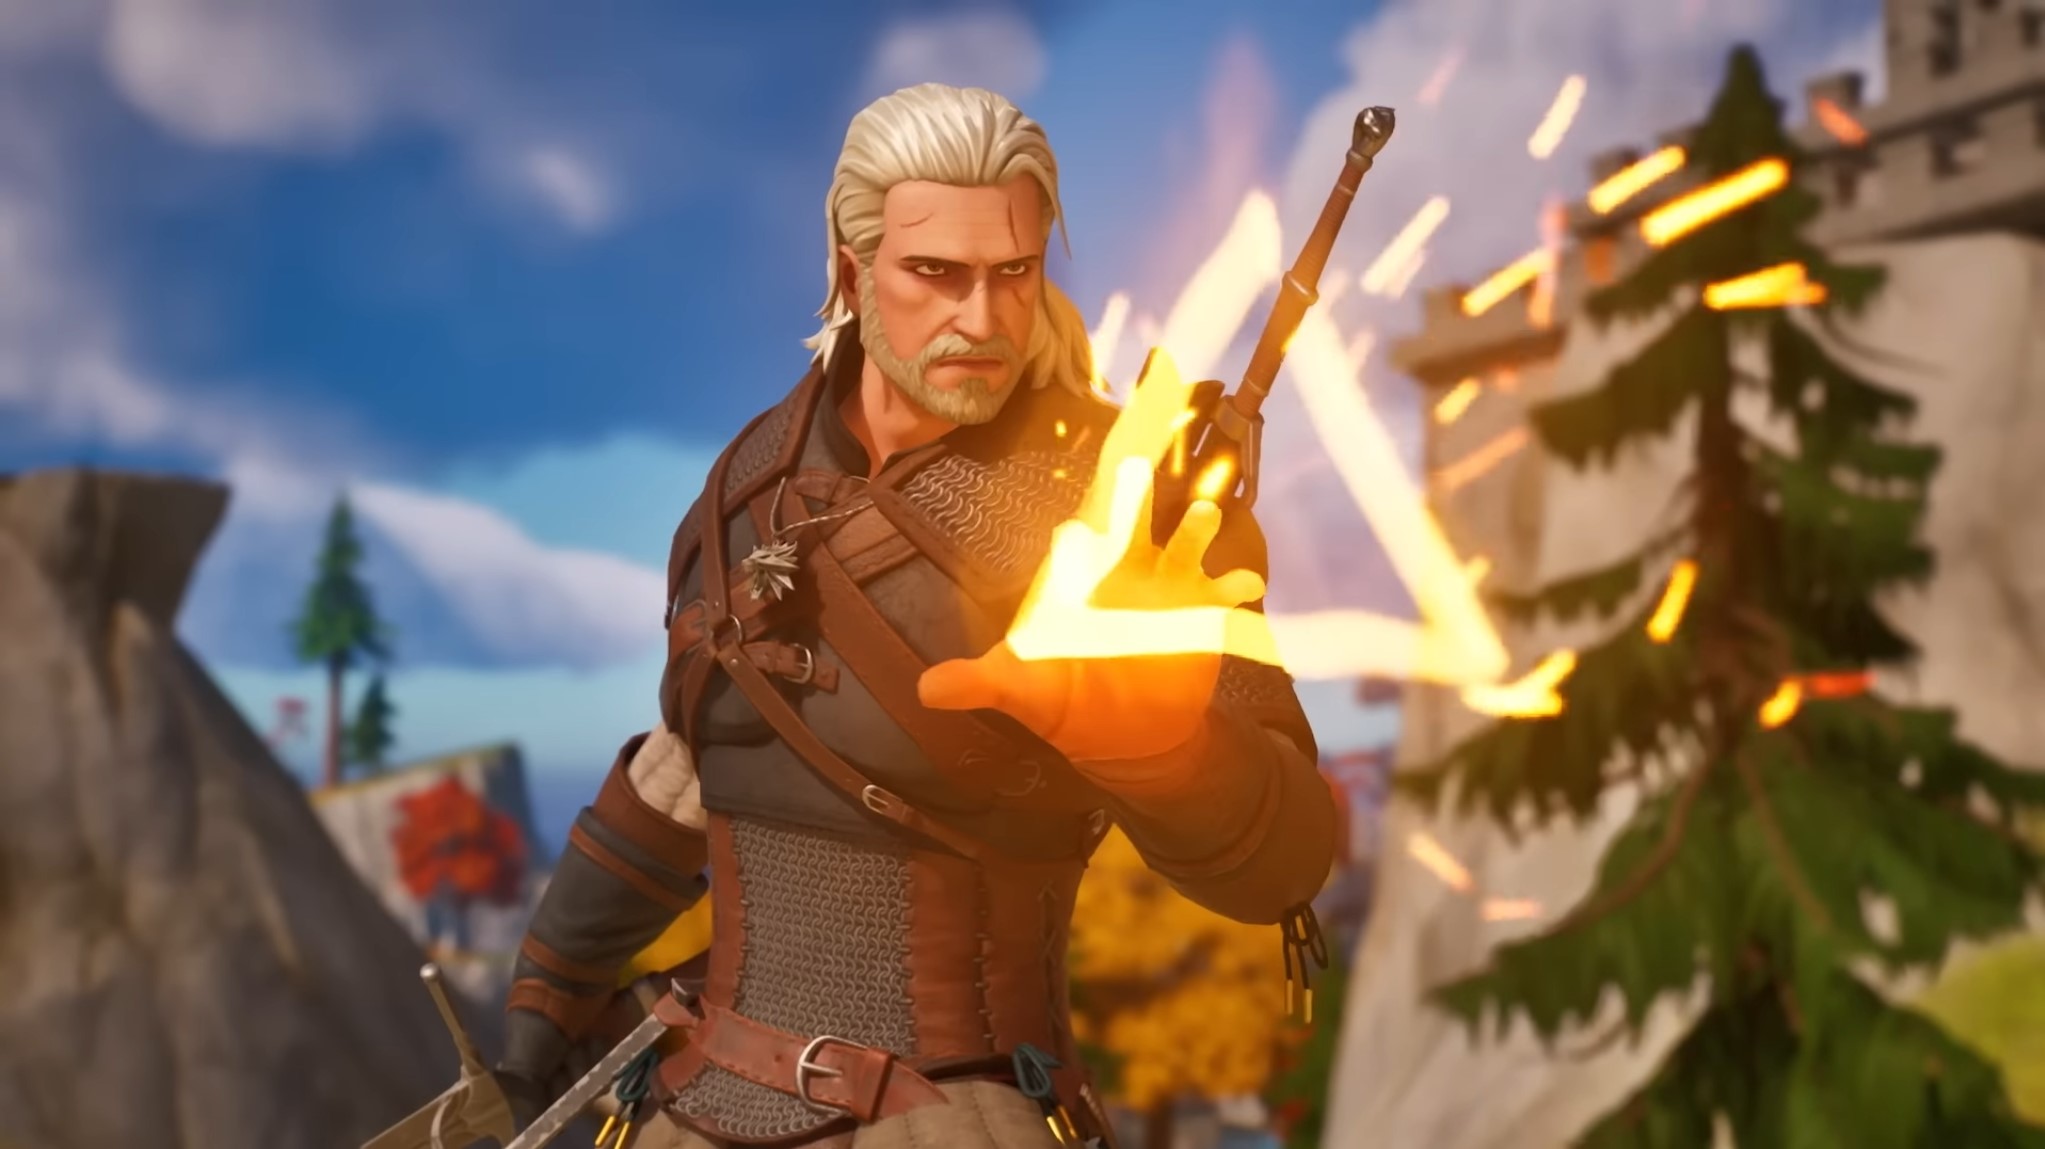 Geralt makes the igni sign in the Fortnite engine